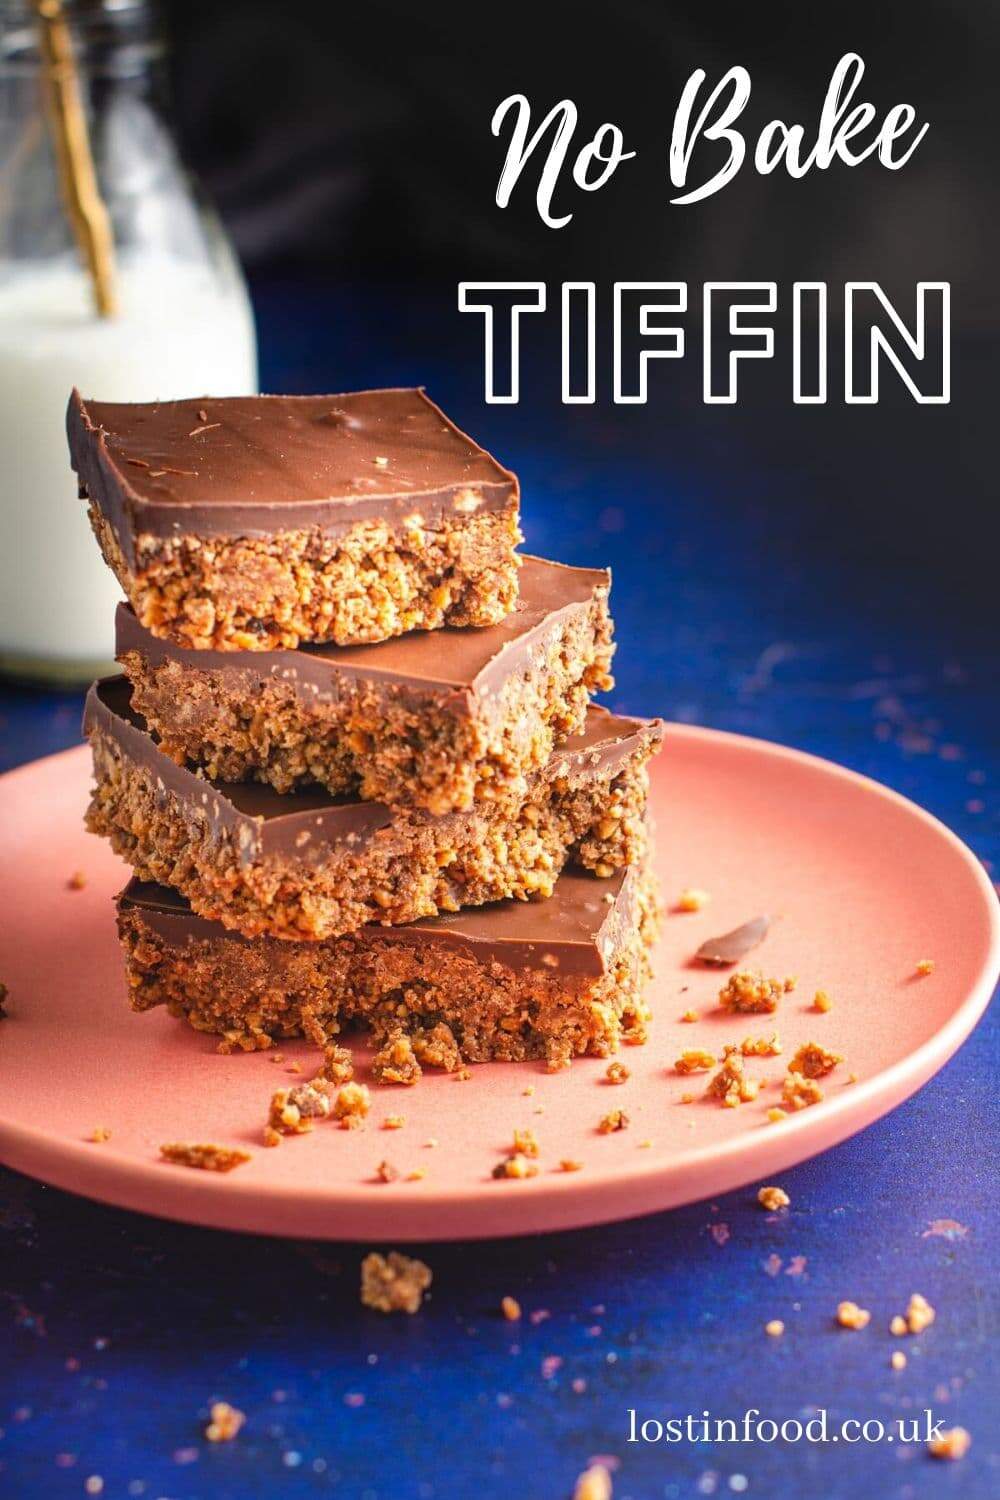 Chocolate tiffin traybake, a memory straight from childhood and so simple and easy its a non bake to get even the youngest kids involved in the kitchen. #recipeforkids #baking #easy #digestive